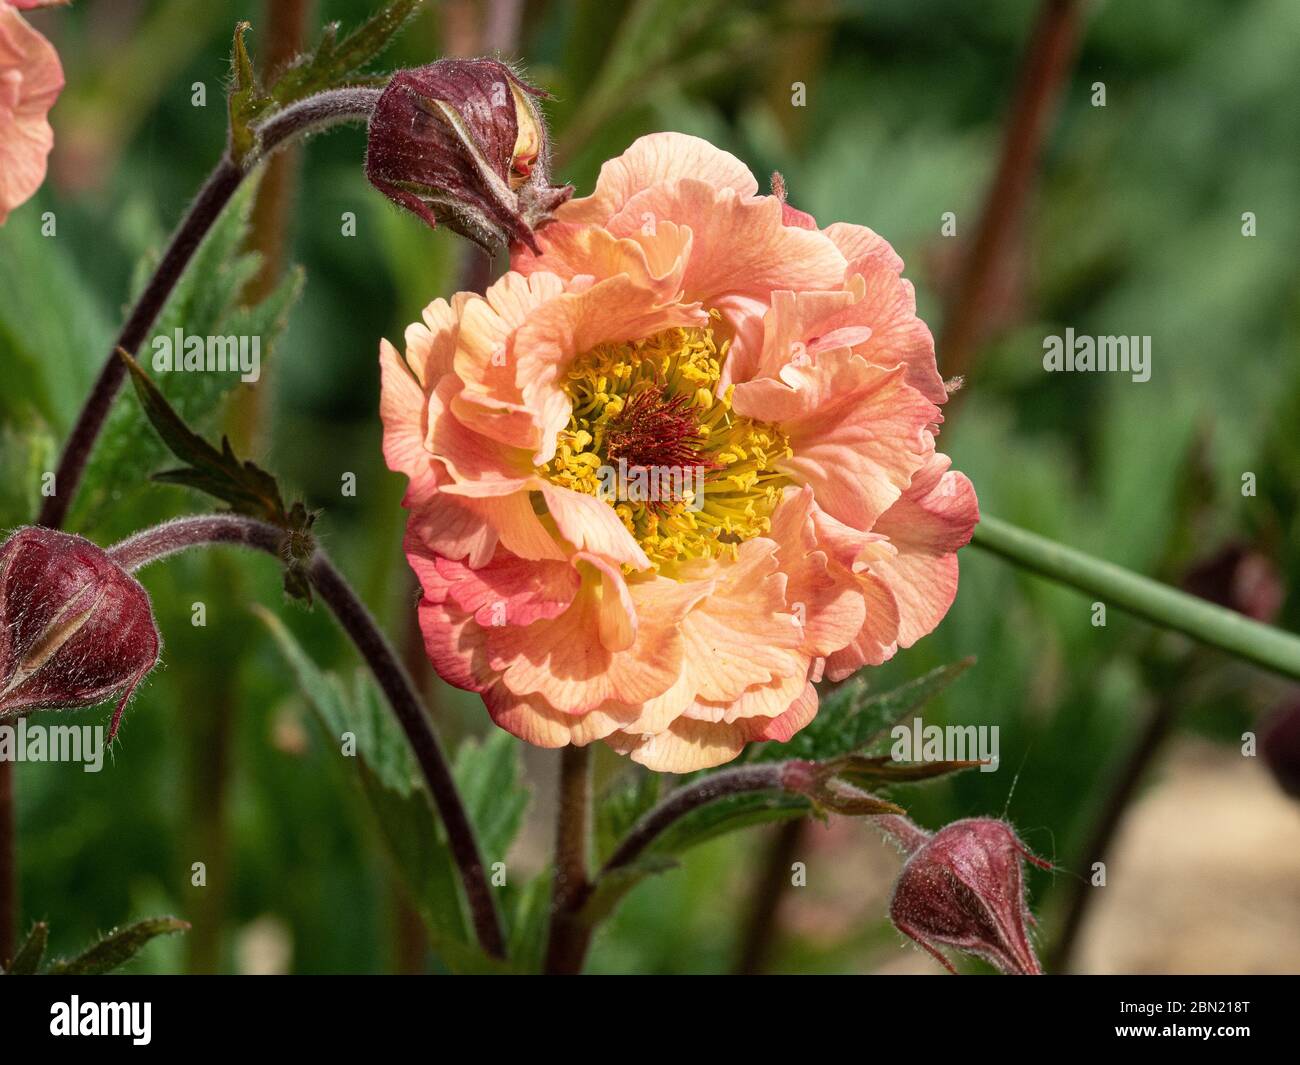 A close up of the apricot coloured flower of Geum rivale Mai Tai Stock Photo